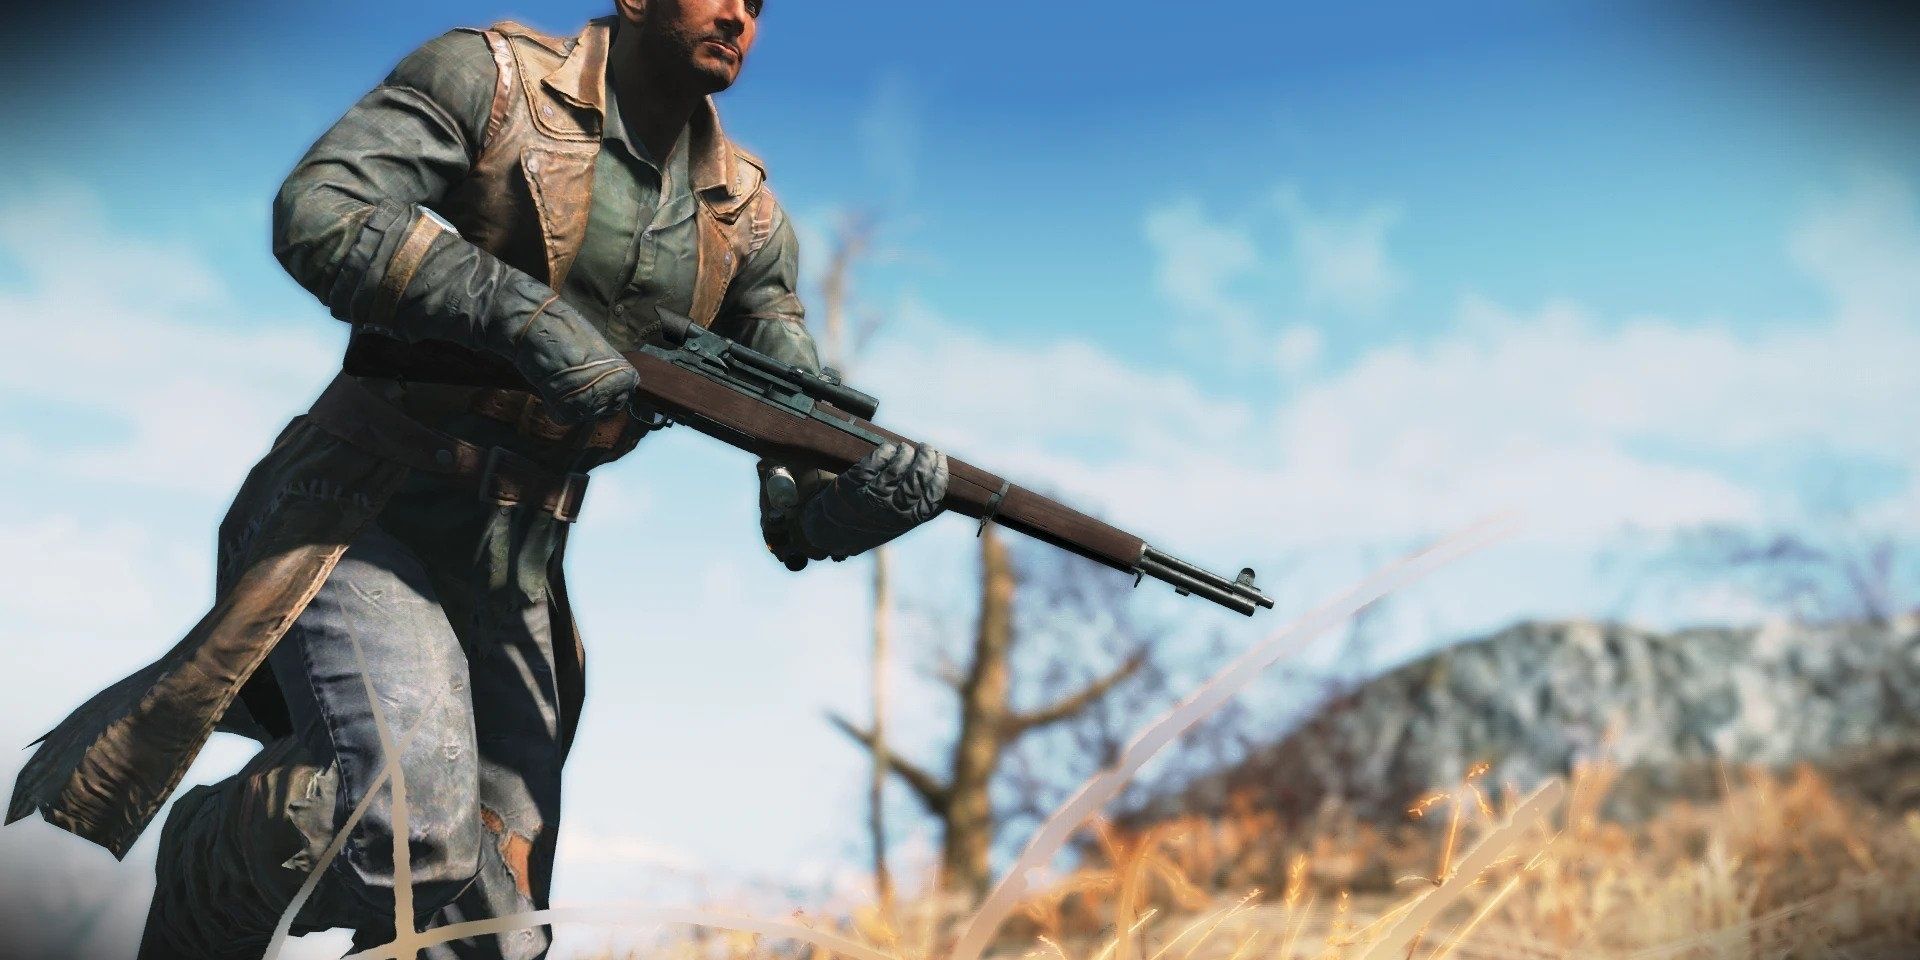 Player sprinting with the M1 Garand in Fallout 4